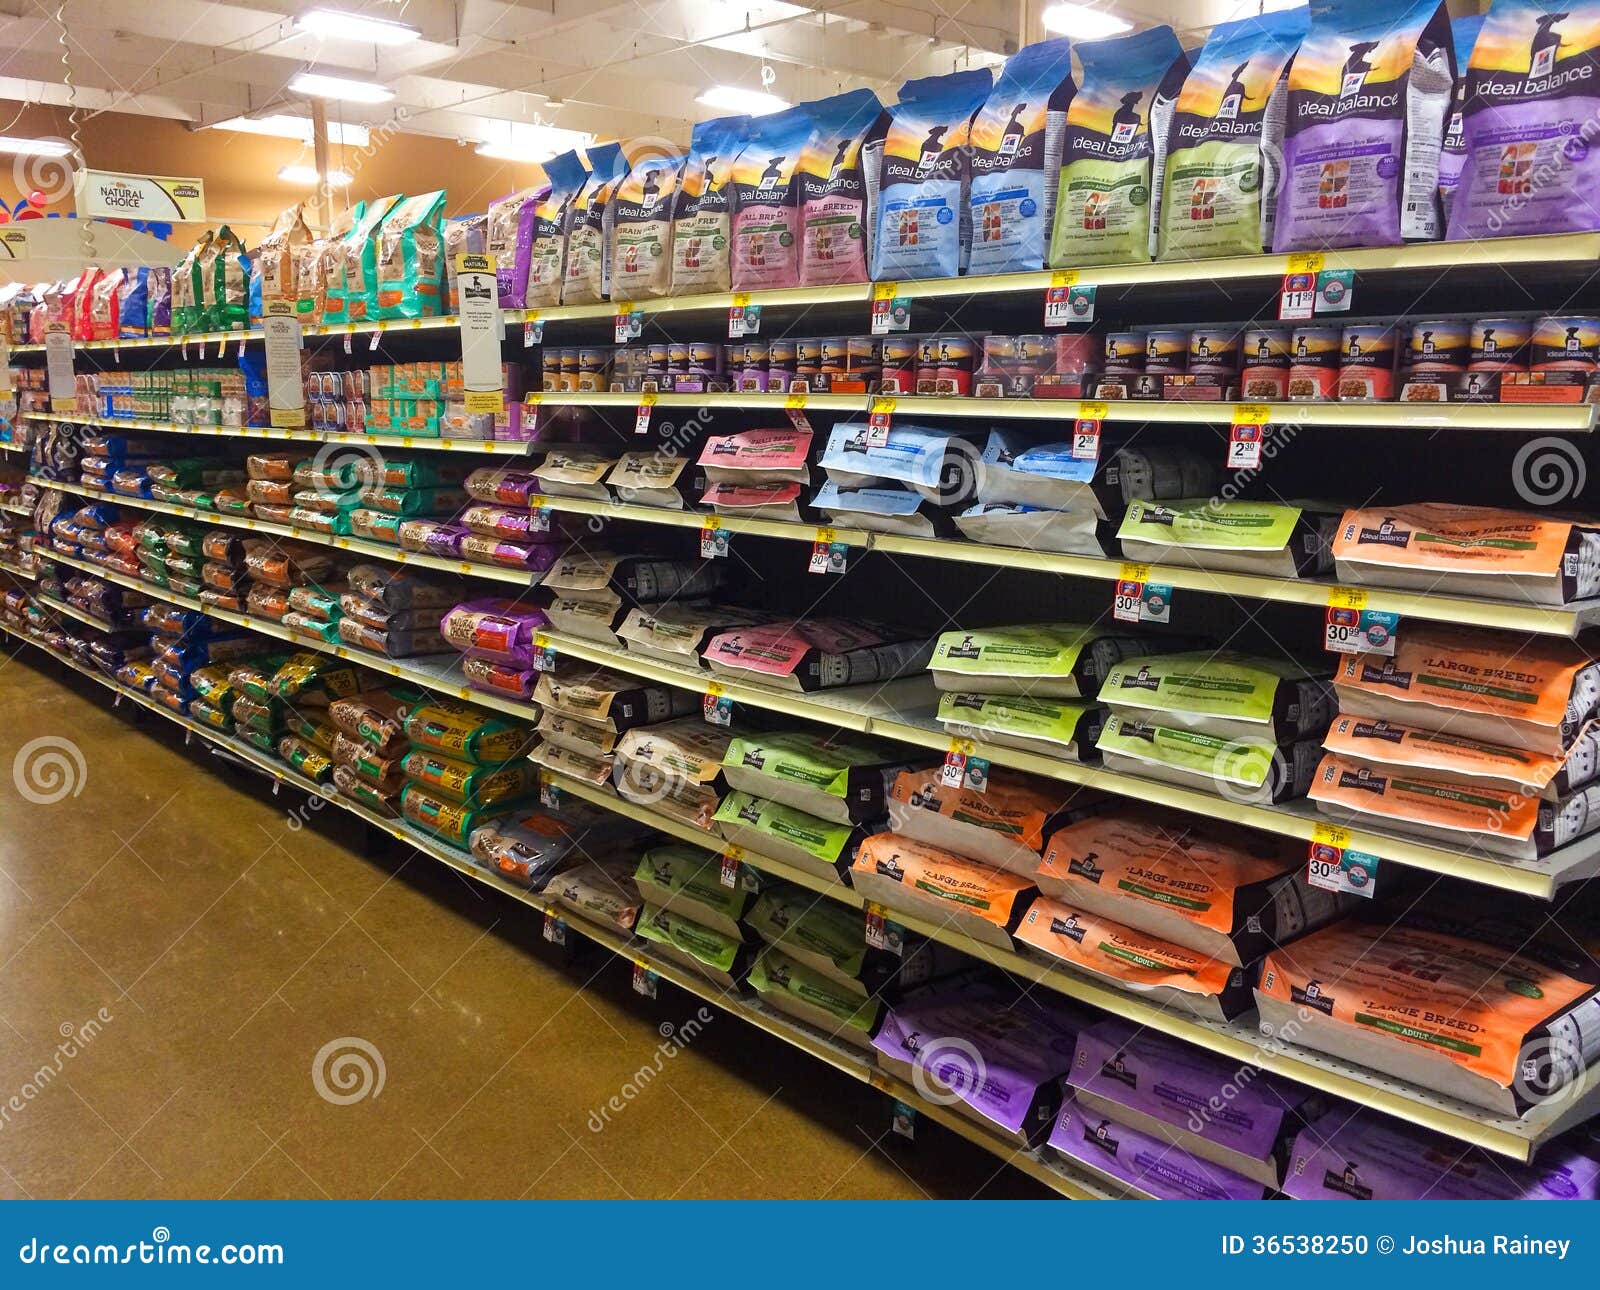 what dog food brands does petsmart carry